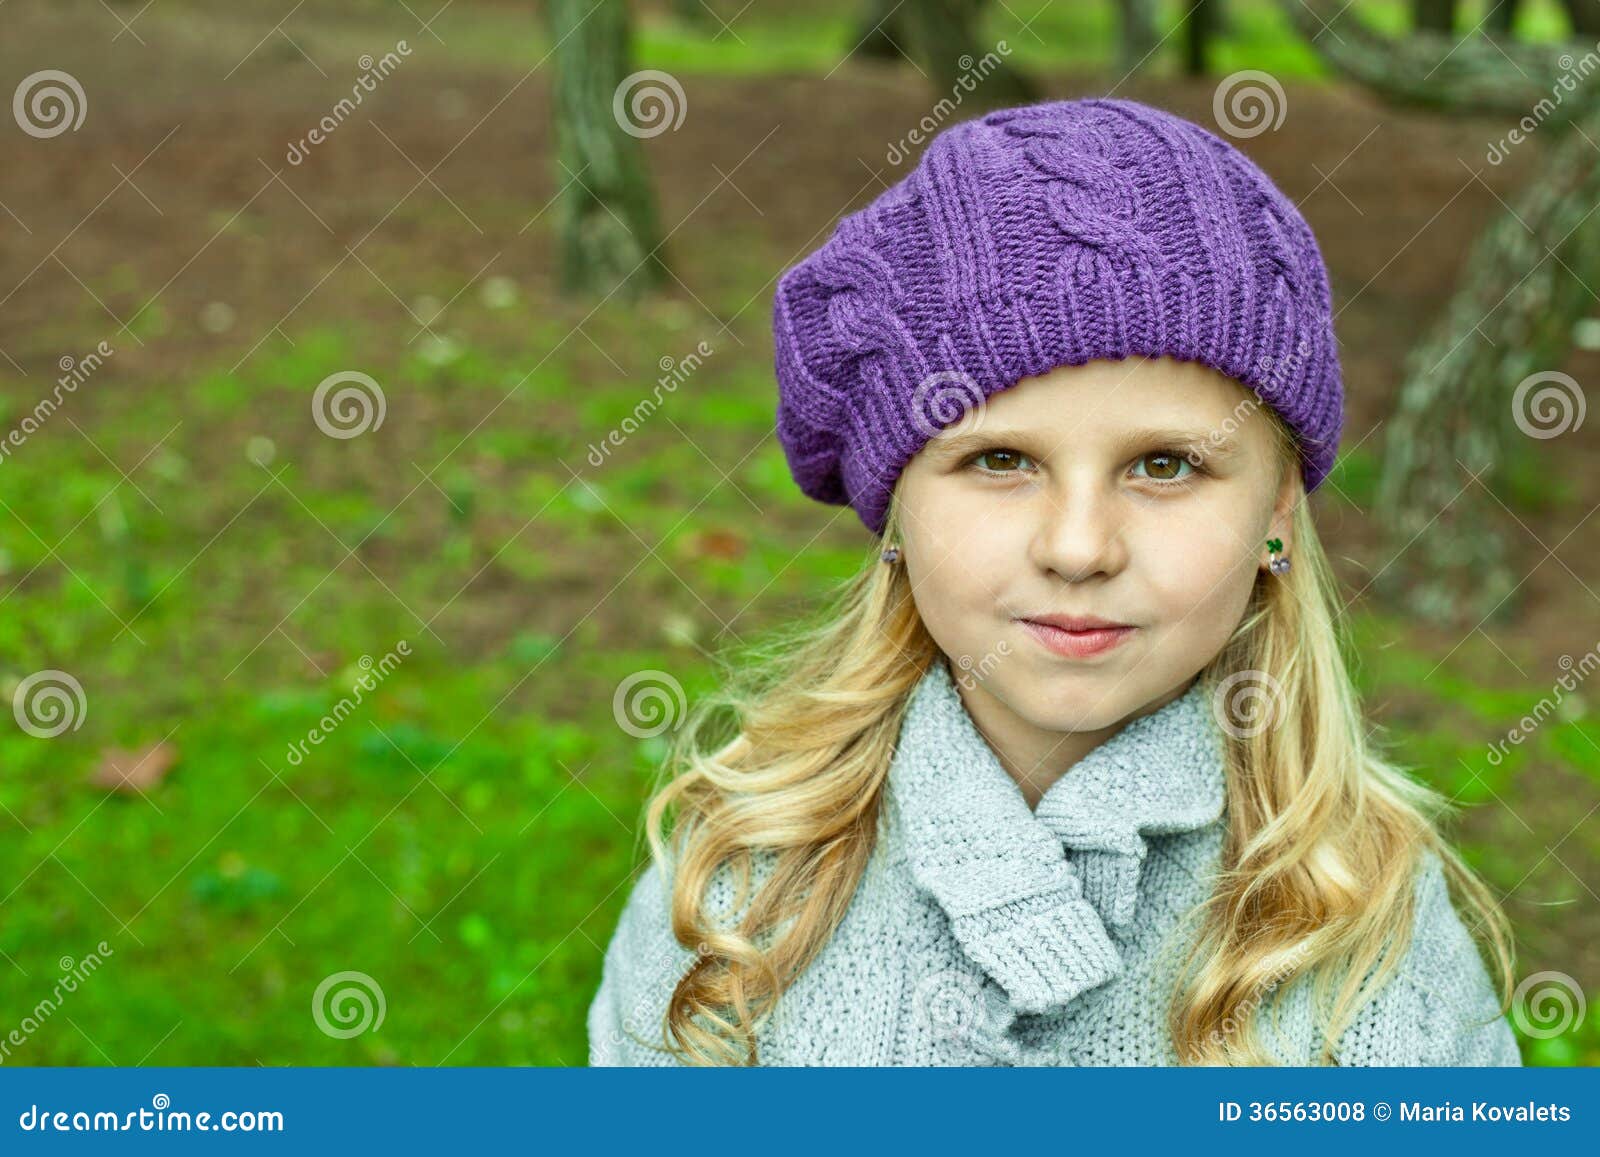 Little girl in the park stock photo. Image of nature - 36563008